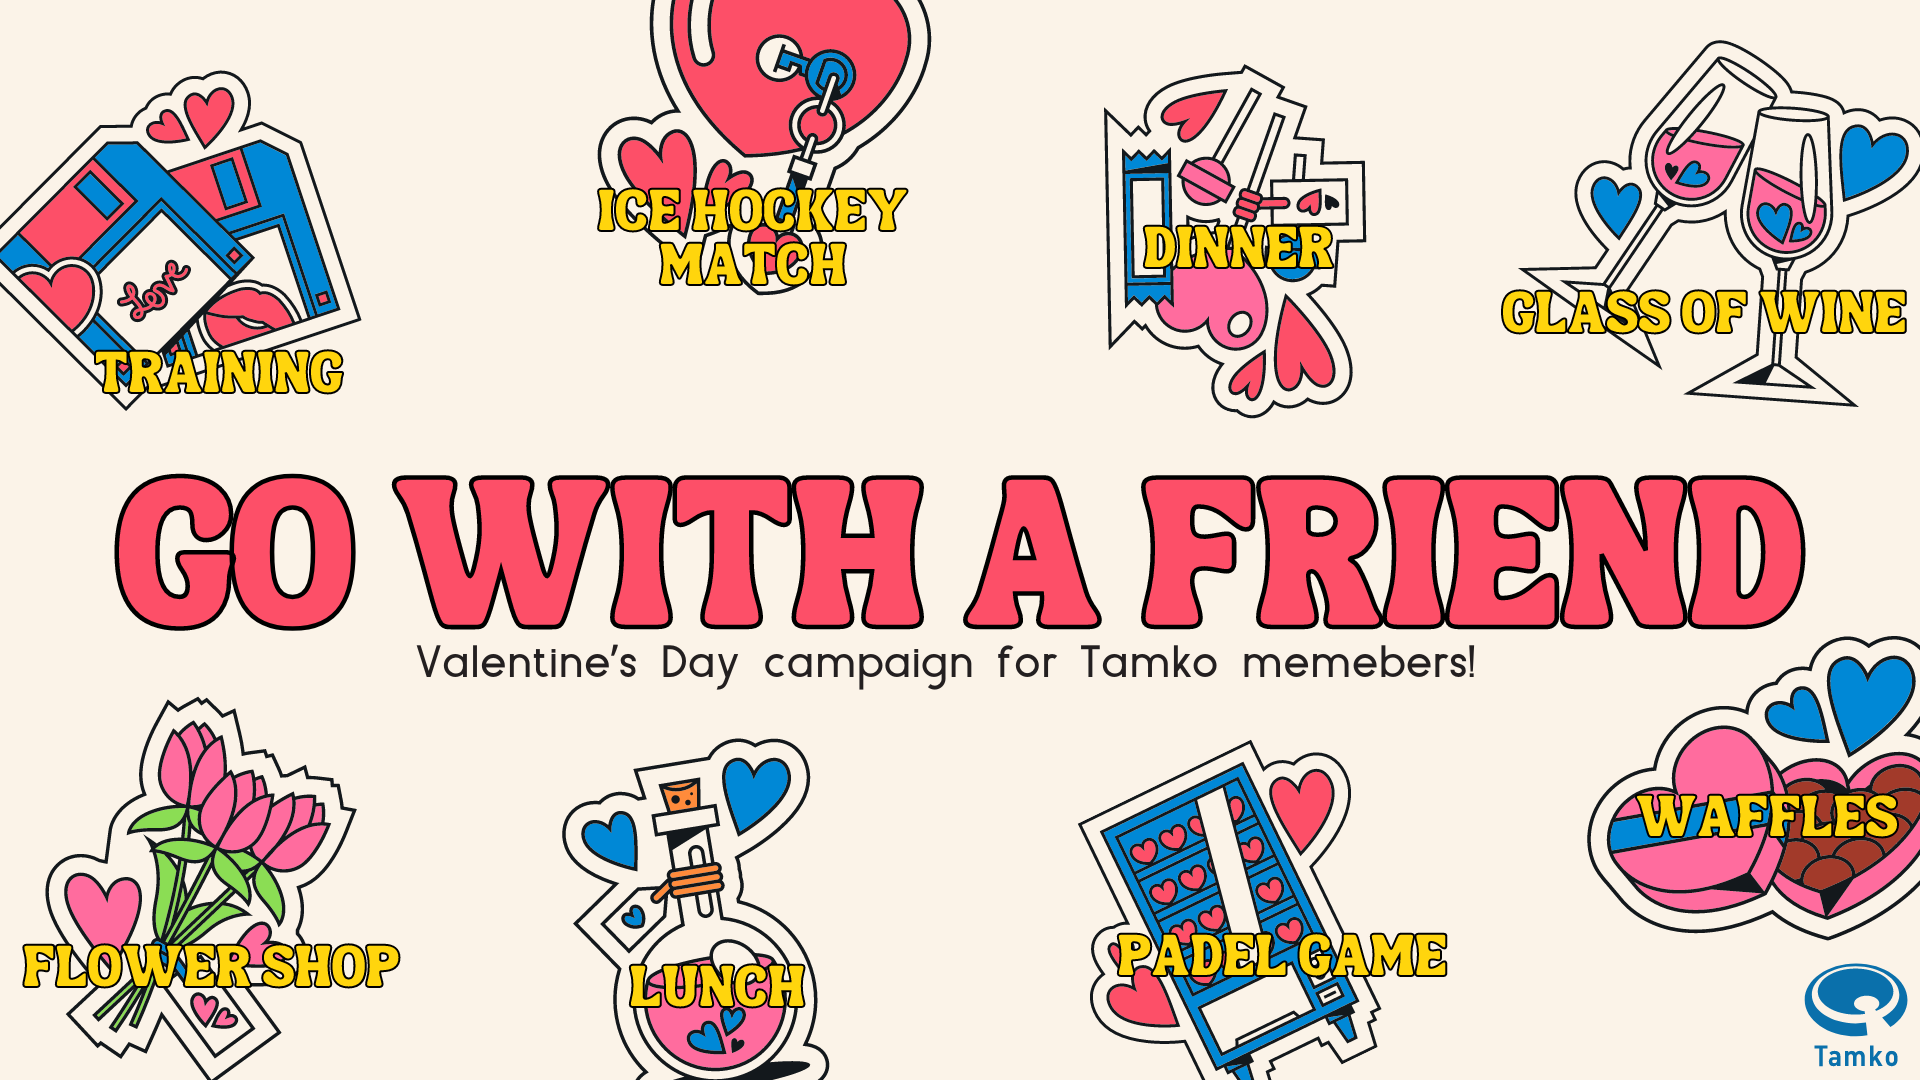 Go with a friend – Valentine’s day discounts for Tamko members